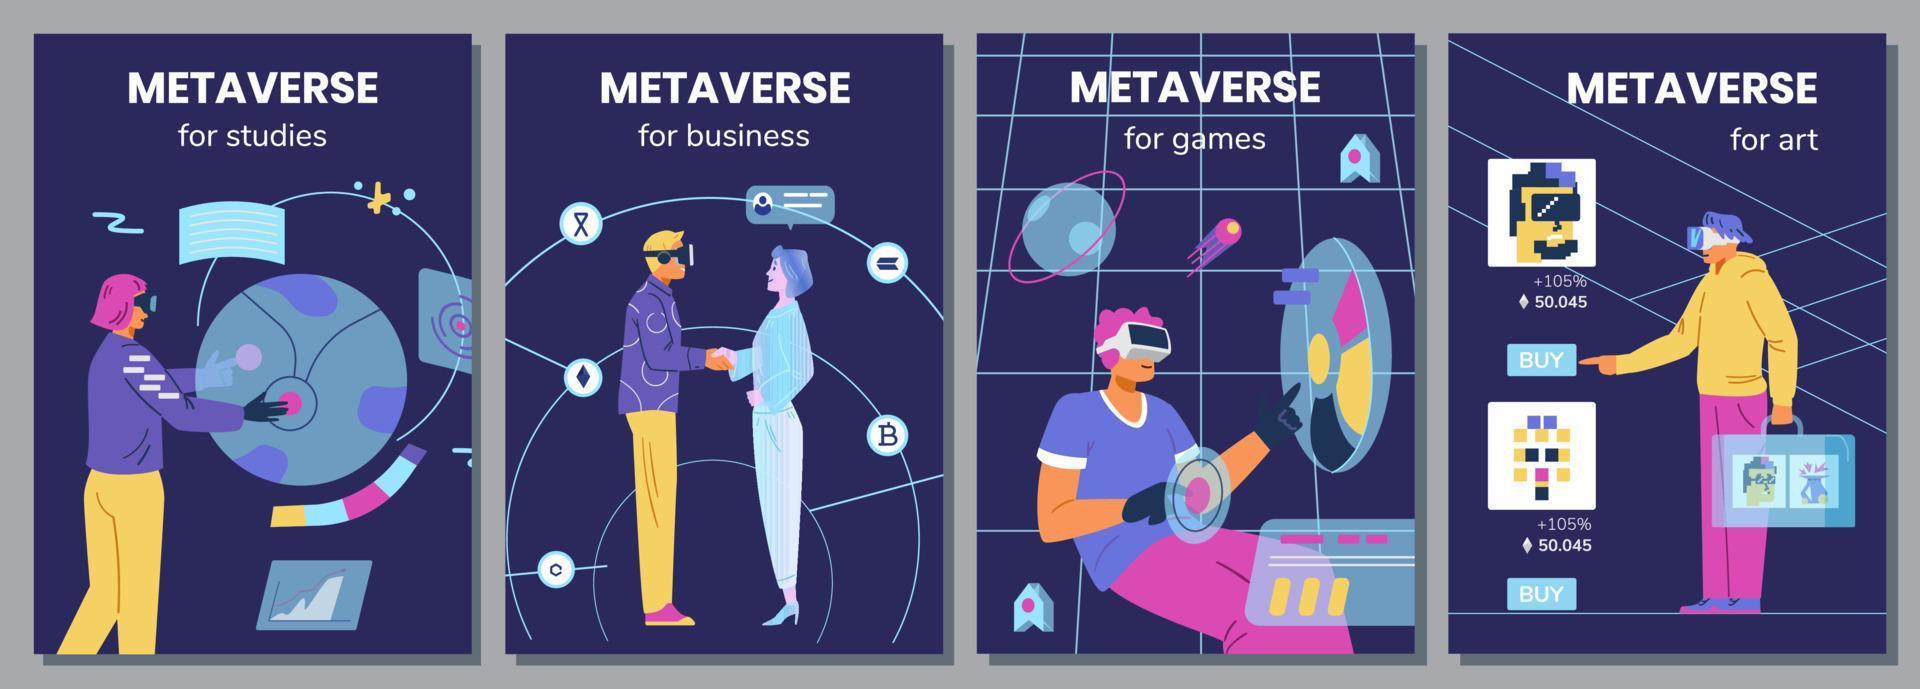 Metaverse in different life spheres set of vector posters. People in VR headsets using metaverse for their purposes - studies, games, business, investment in NFT art.